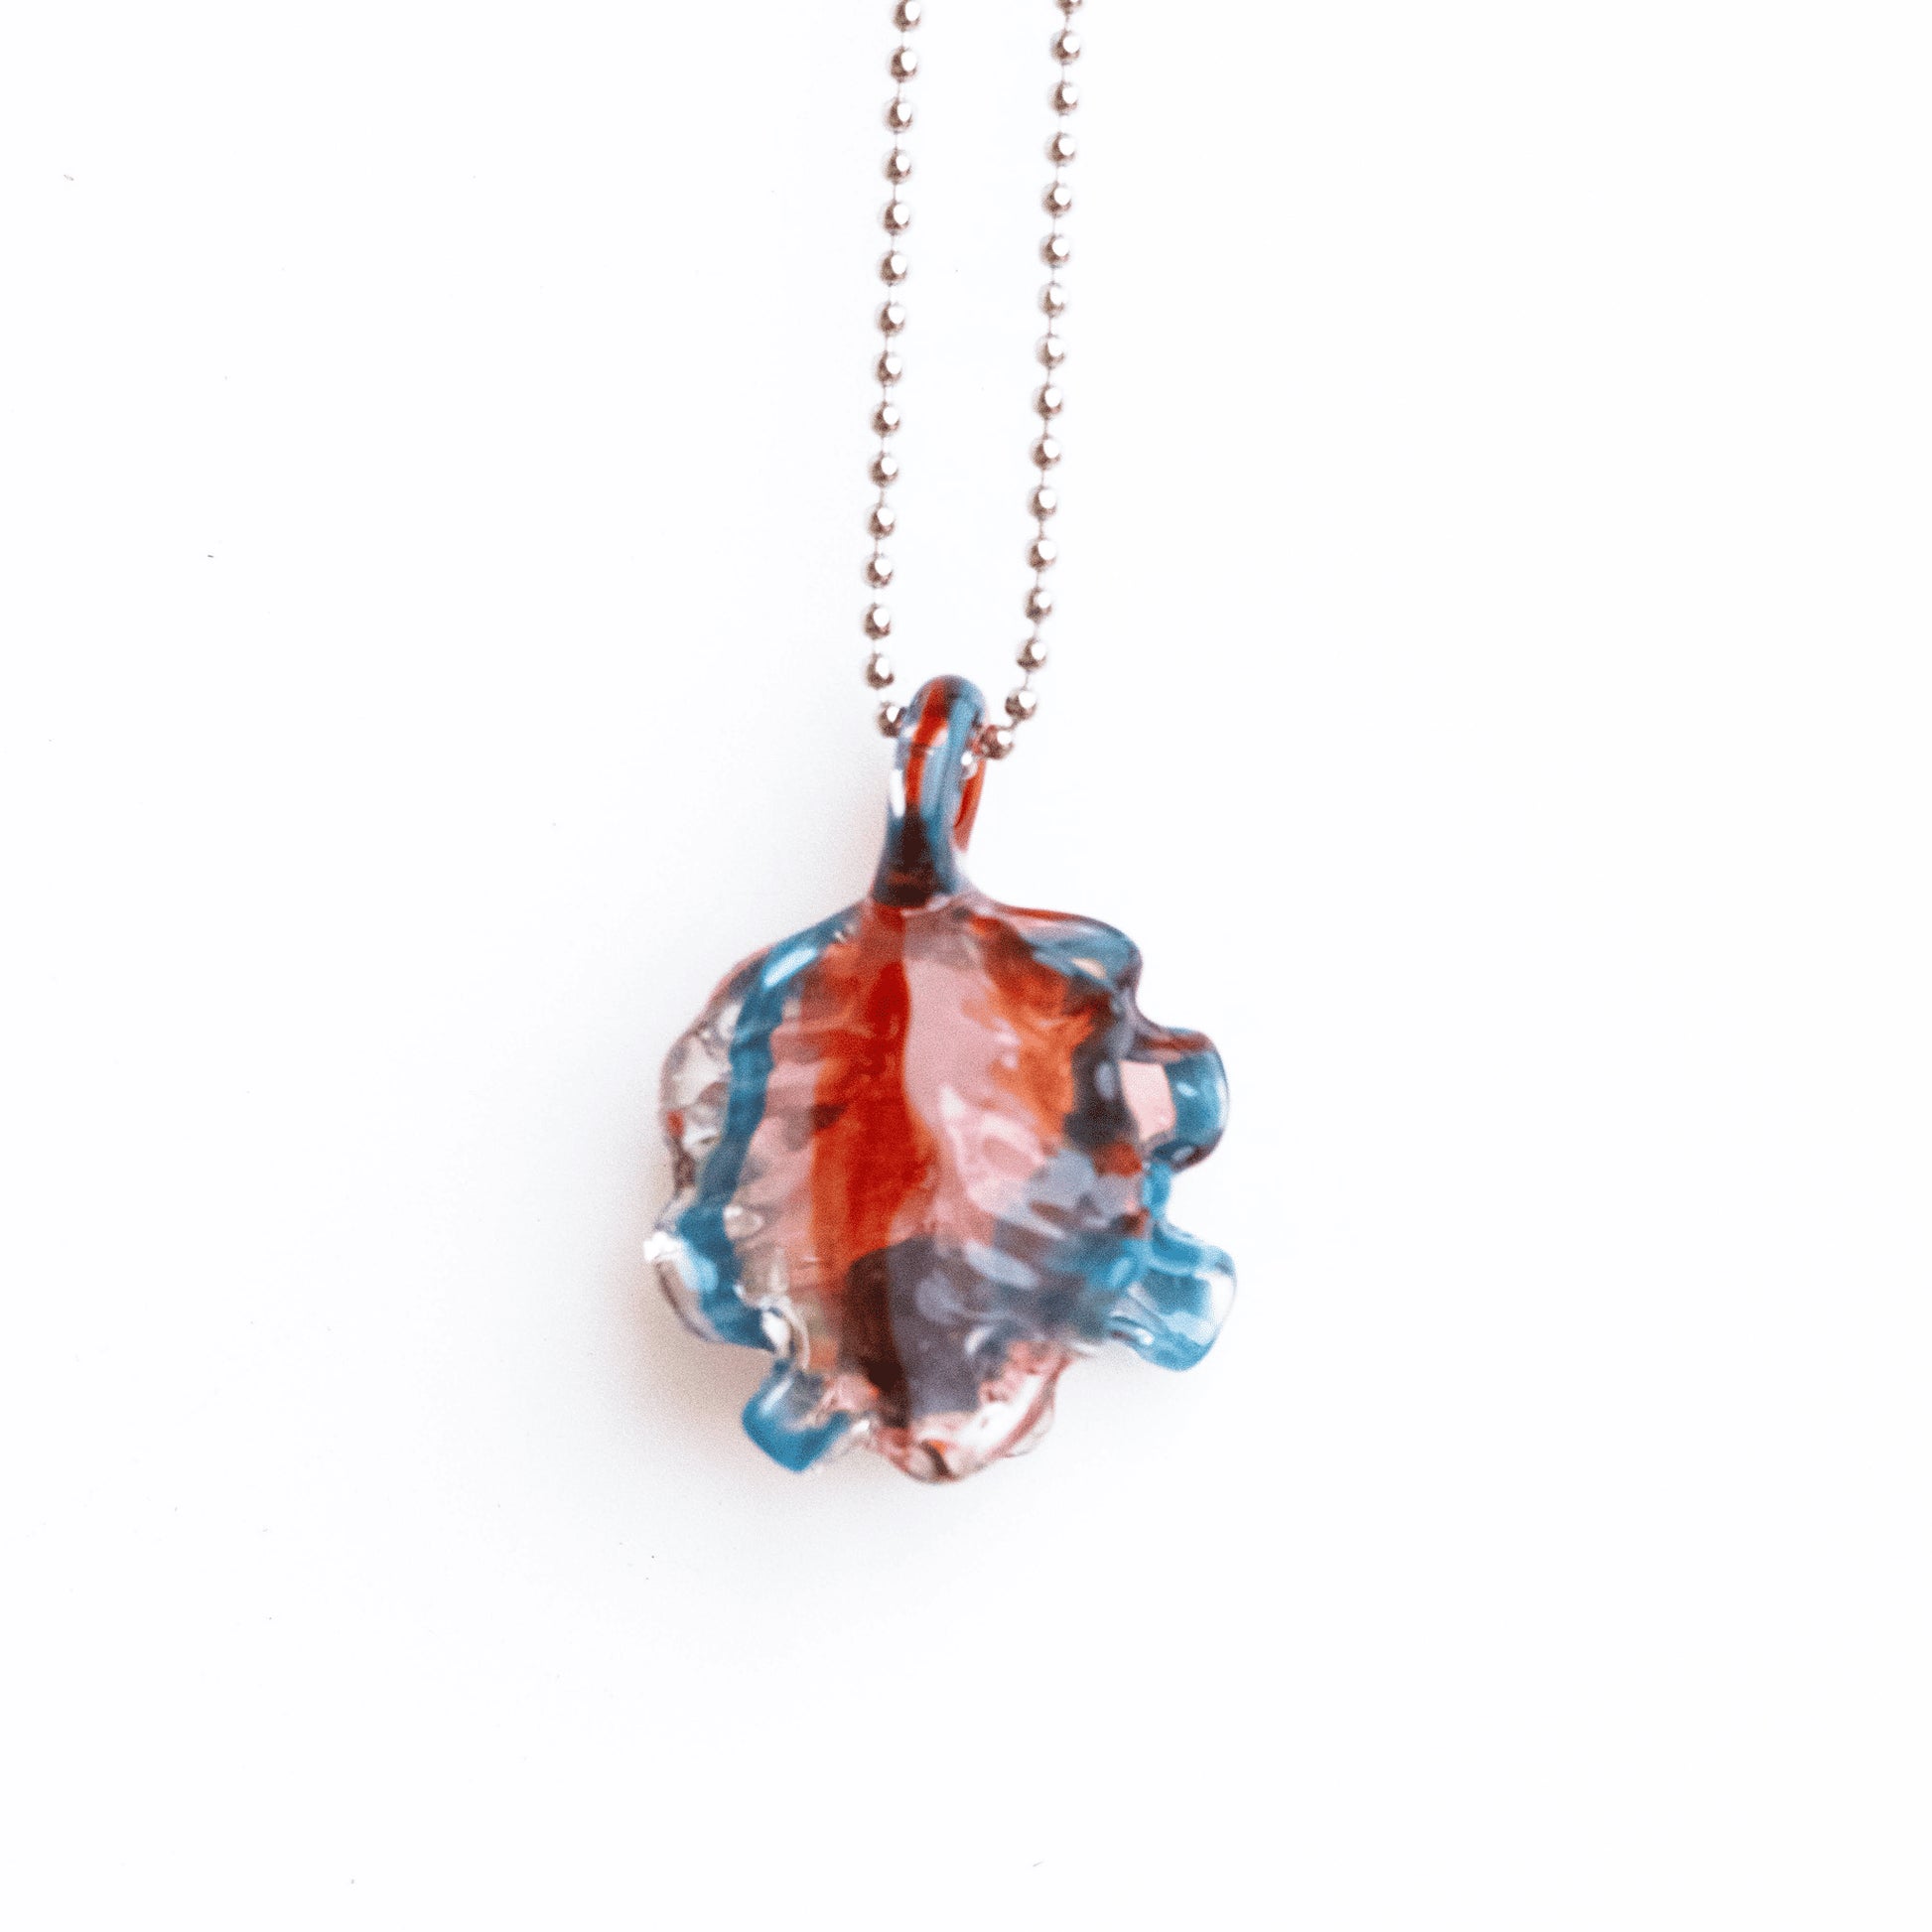 artisan-crafted glass pendant - Oyster Seashell Pendant (C) by Patty D Glass